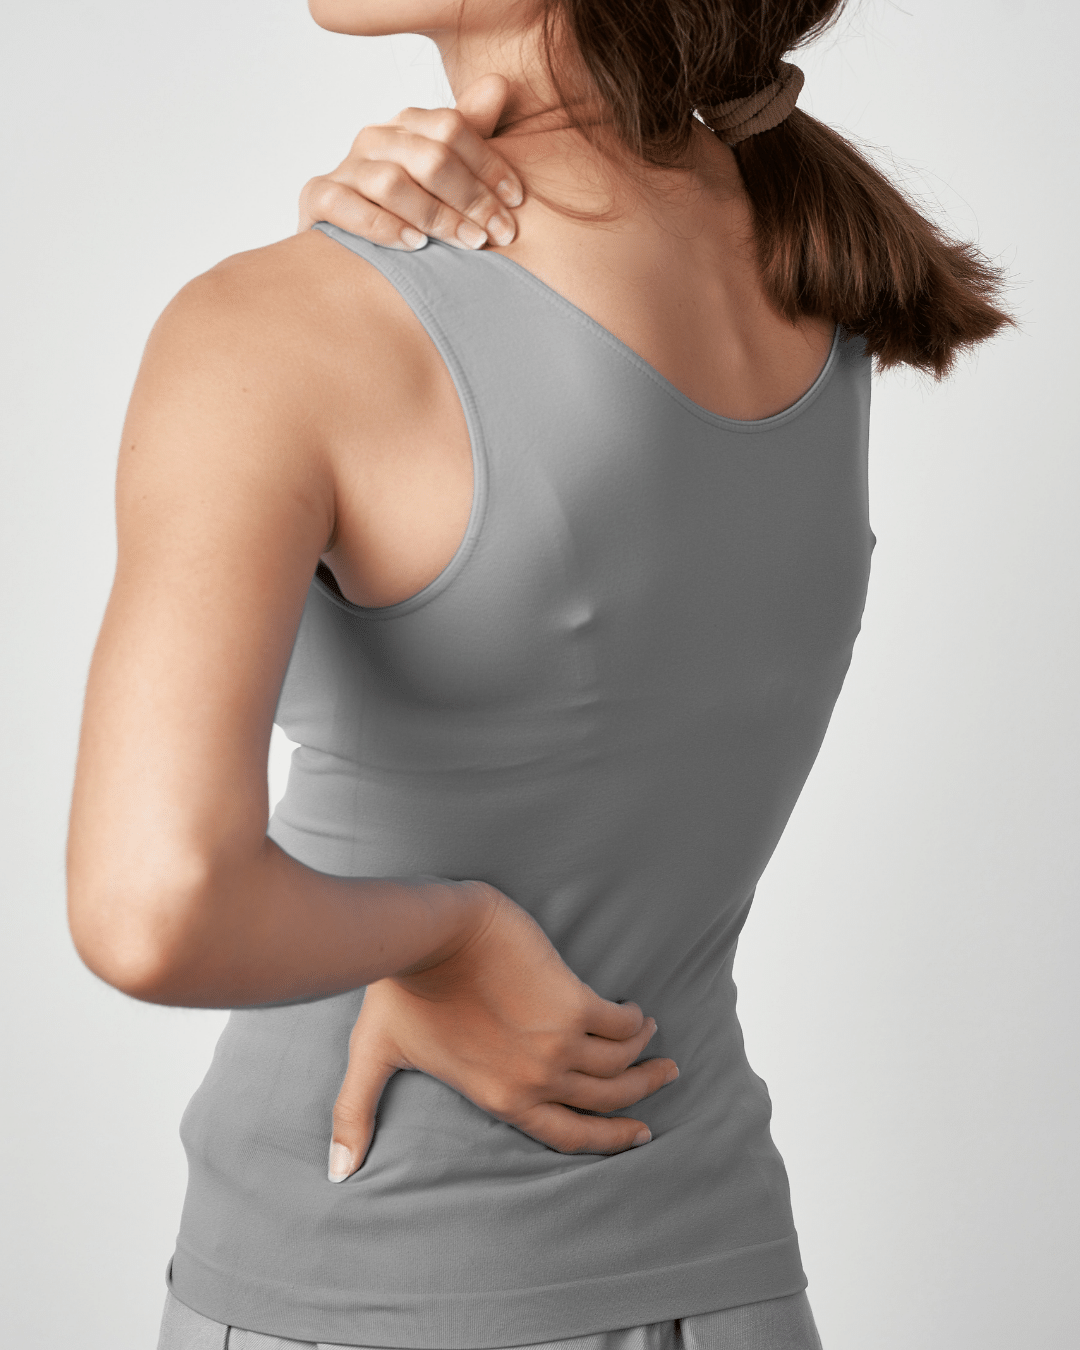 Neck pain and back pain